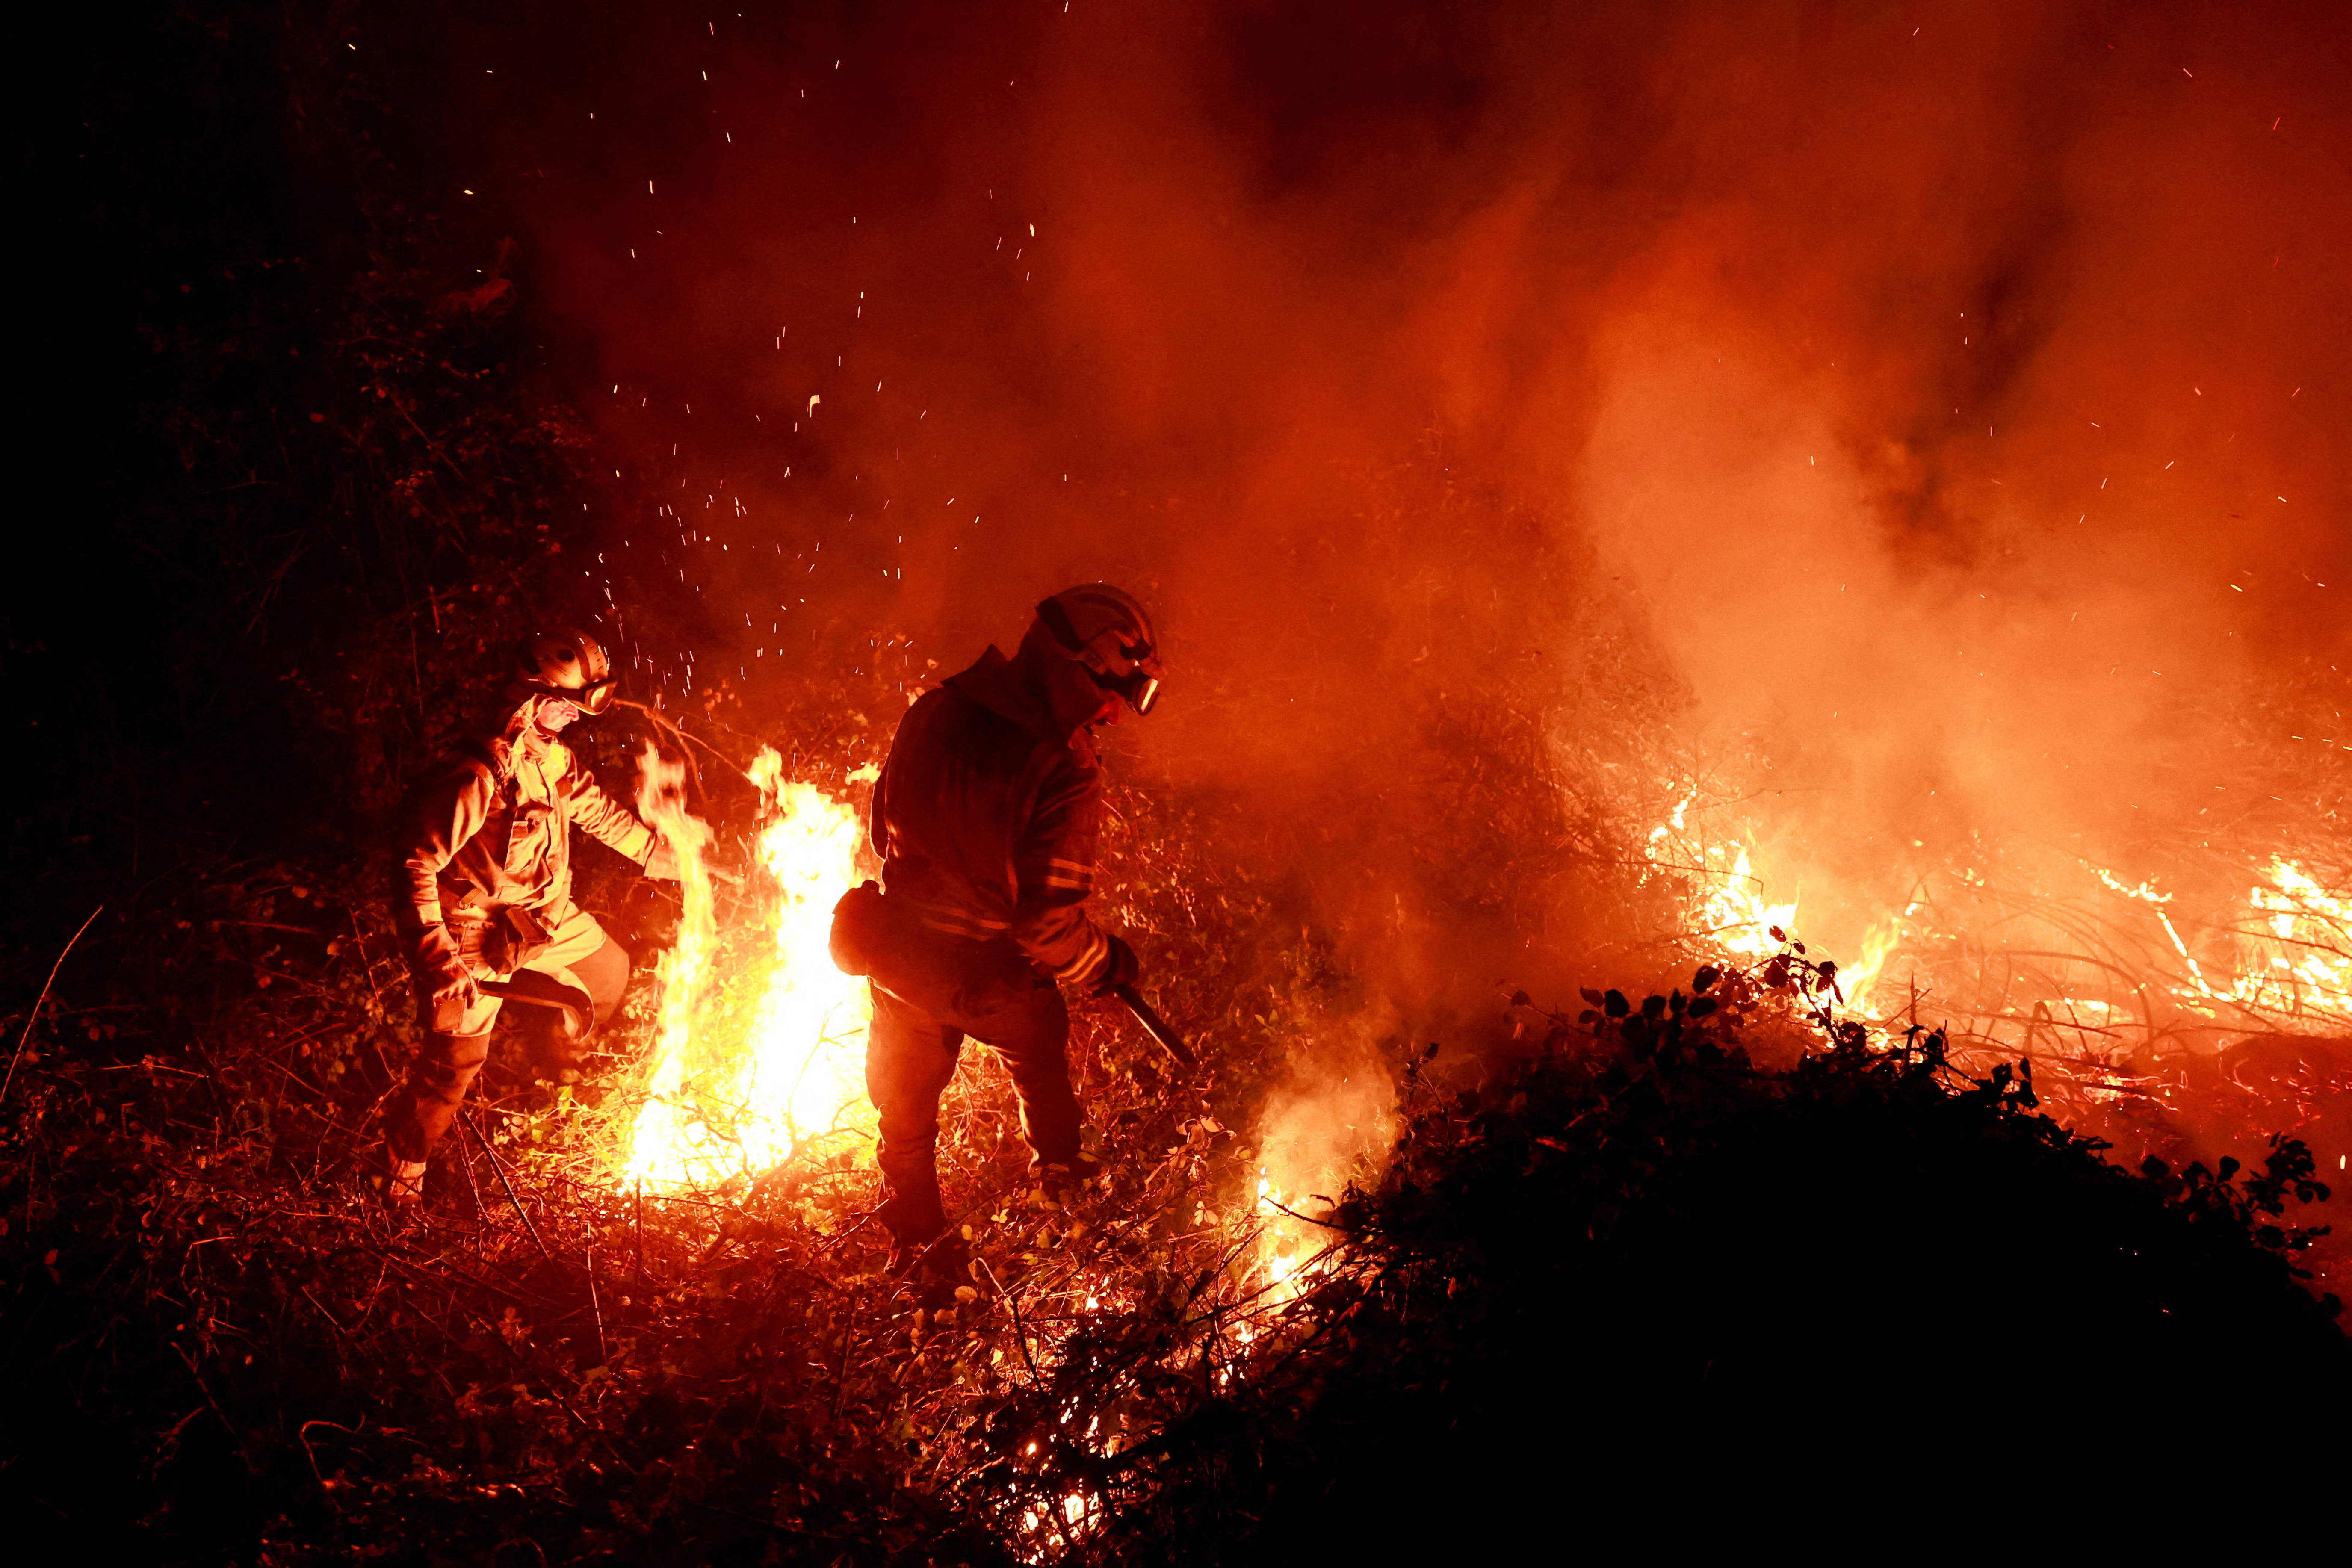 Galician firefighters tackle flames in a forest during an outbreak of forest fires, in Piedrafita